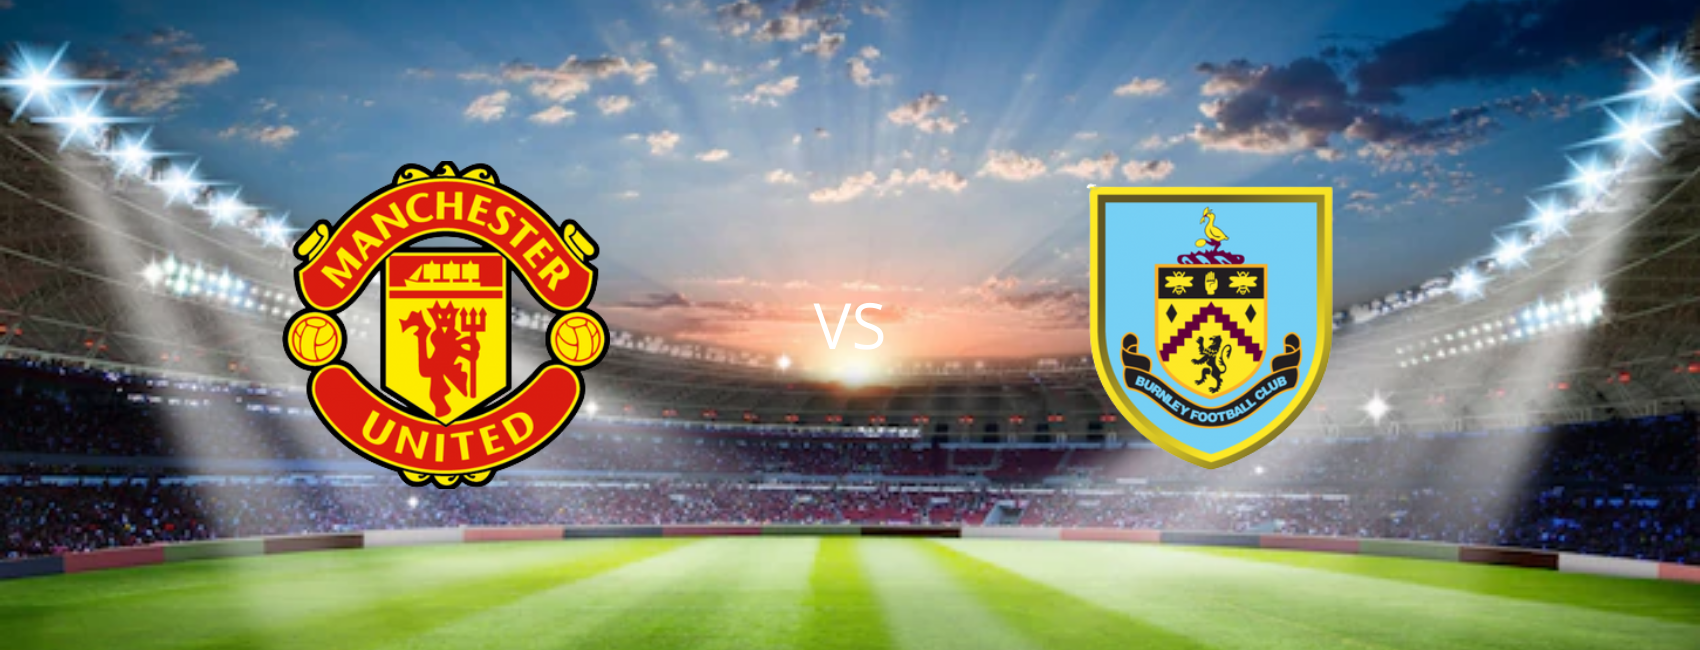 Manchester United - Burnley - Carabao Cup